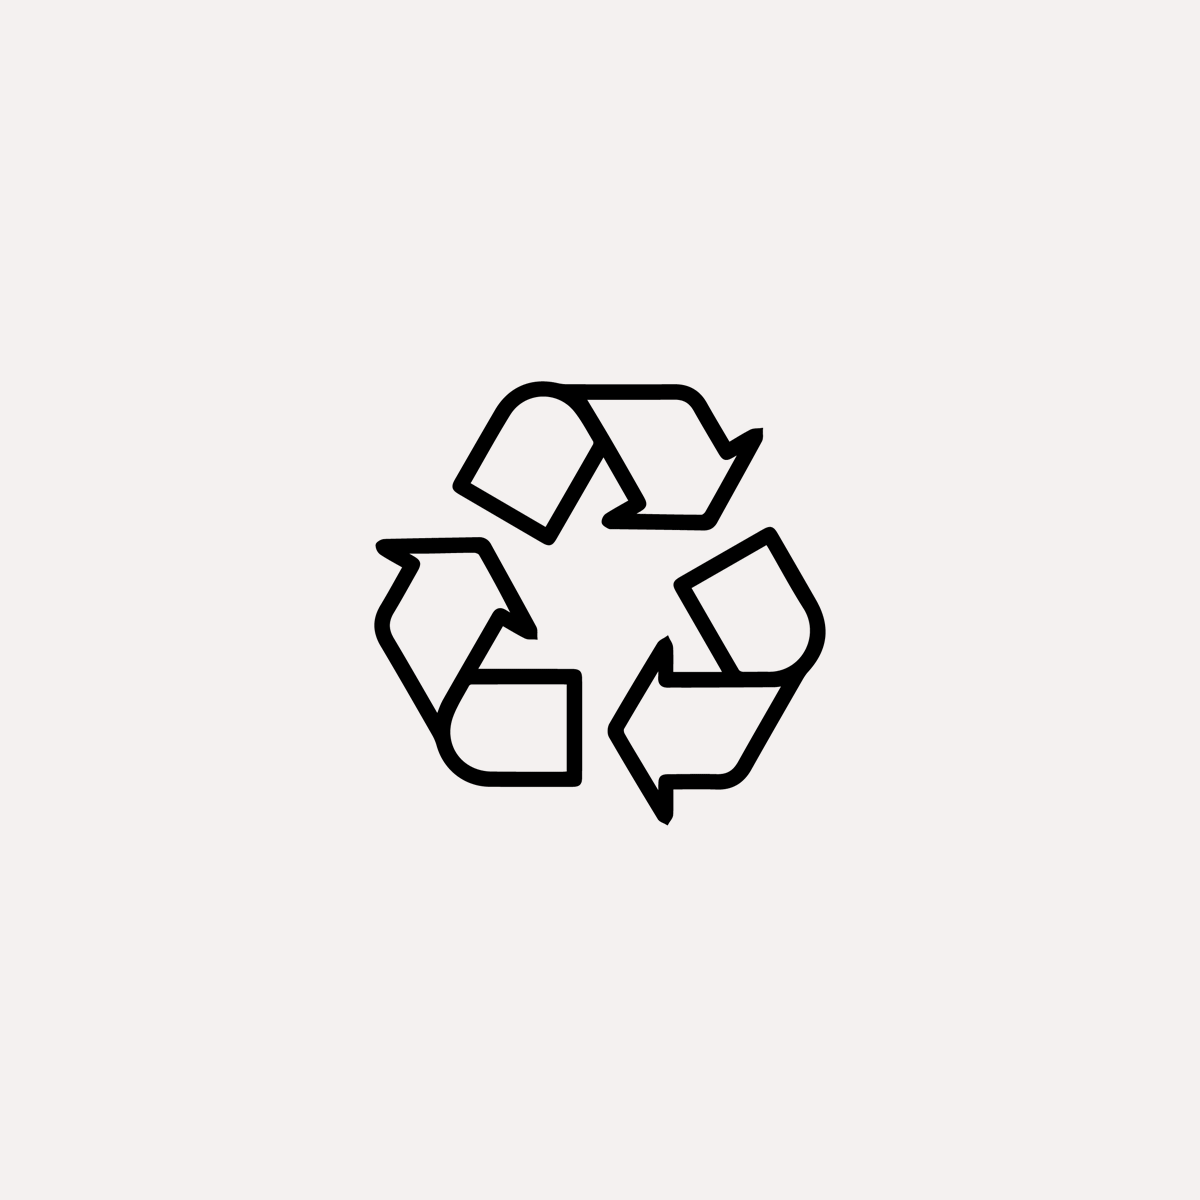 Pictured is moving gif of recycle icon